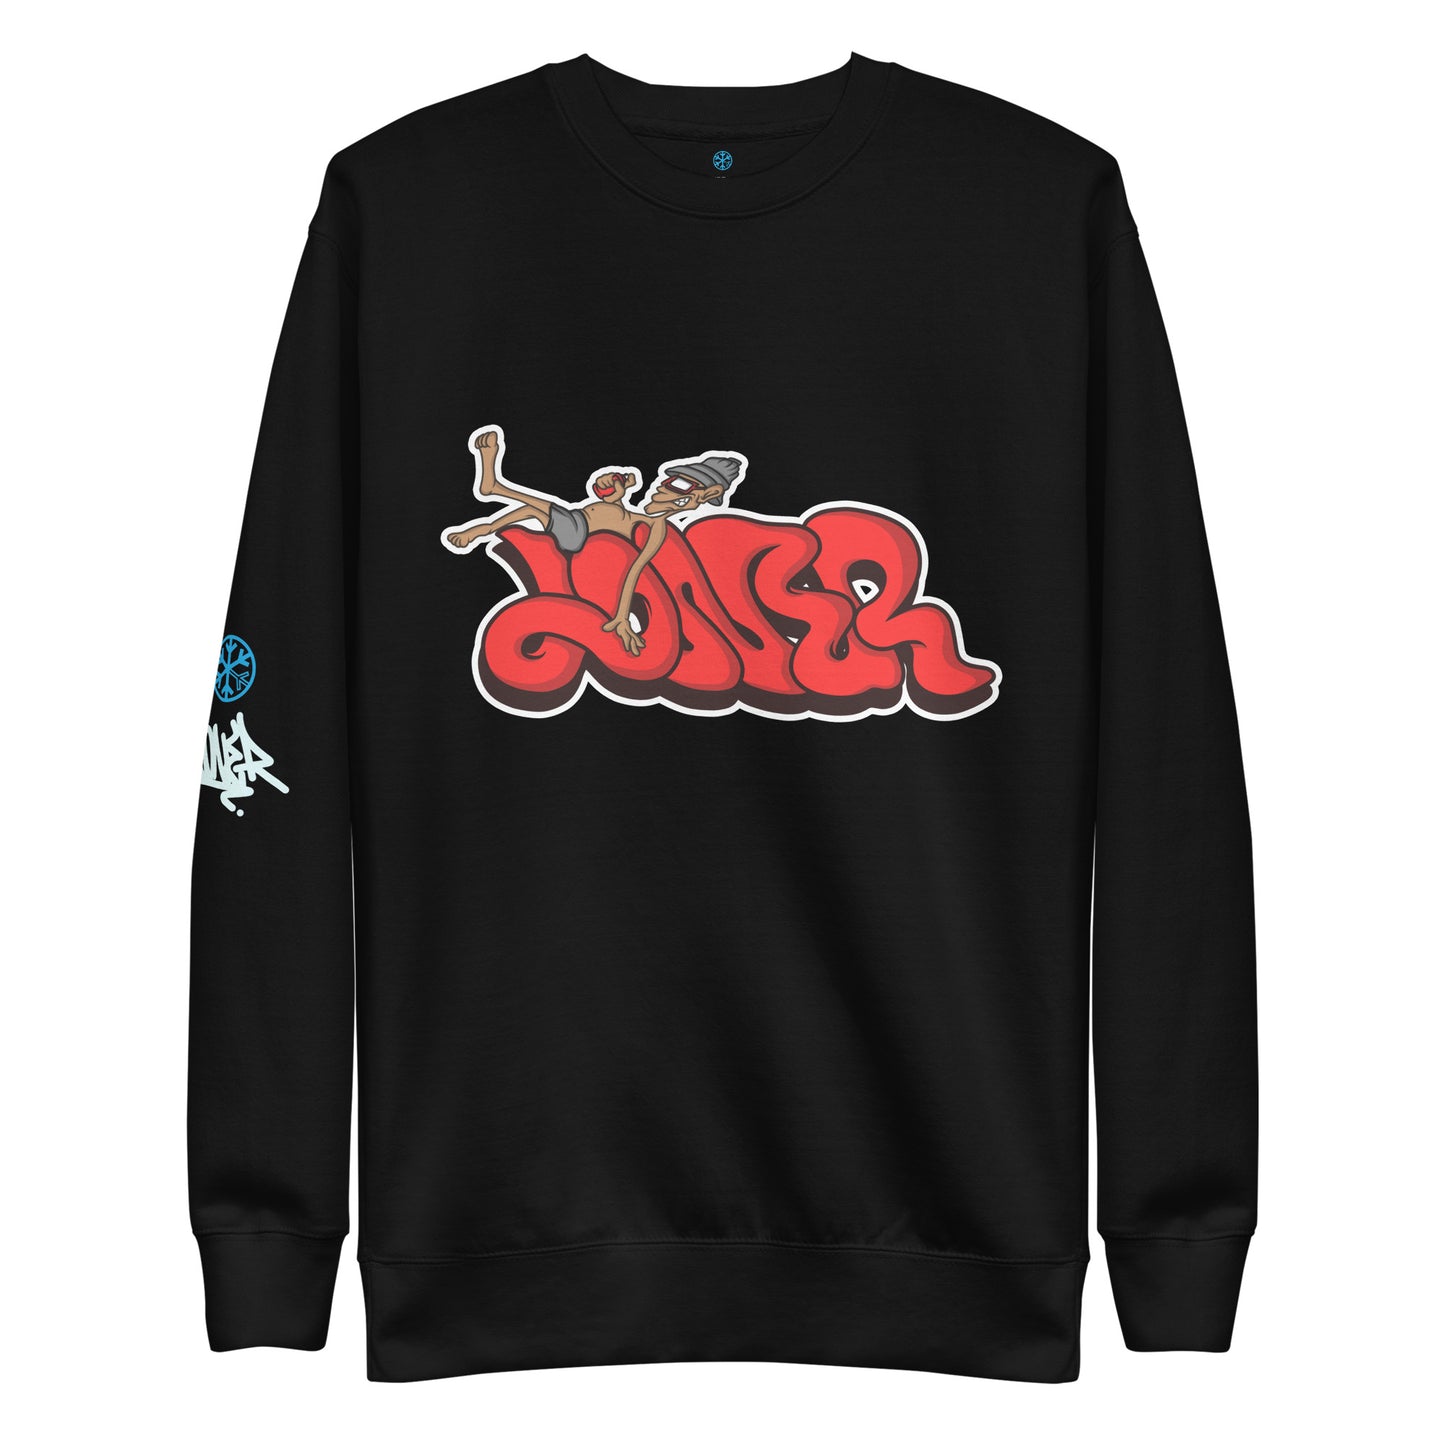 Loner Sweatshirt black by B.Different Clothing street art graffiti inspired streetwear brand for weirdos, outsiders, and misfits.